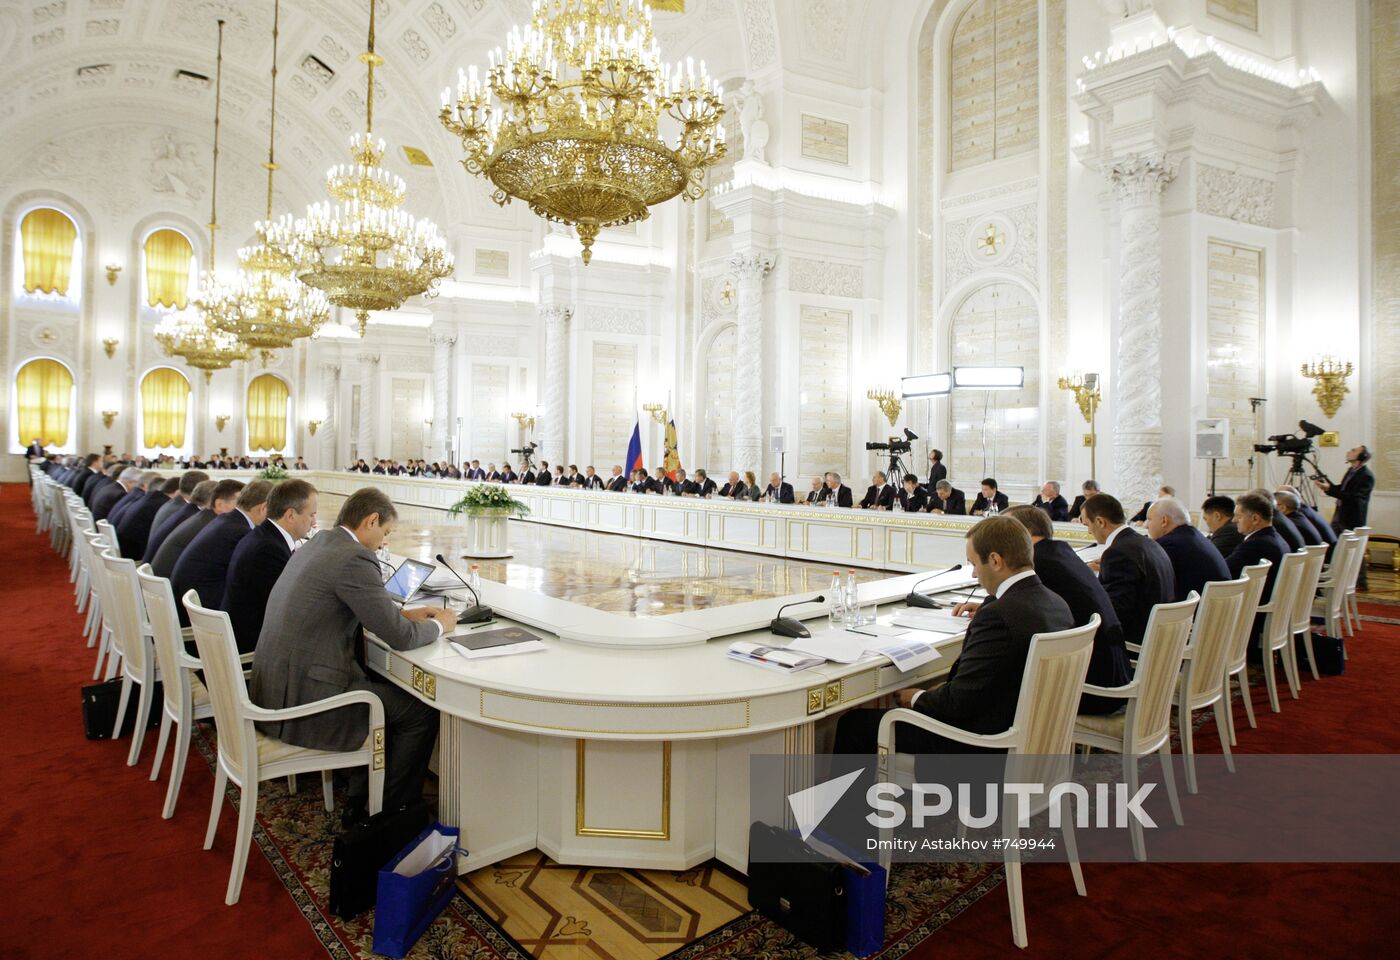 Meeting of State Council and Modernization Committee